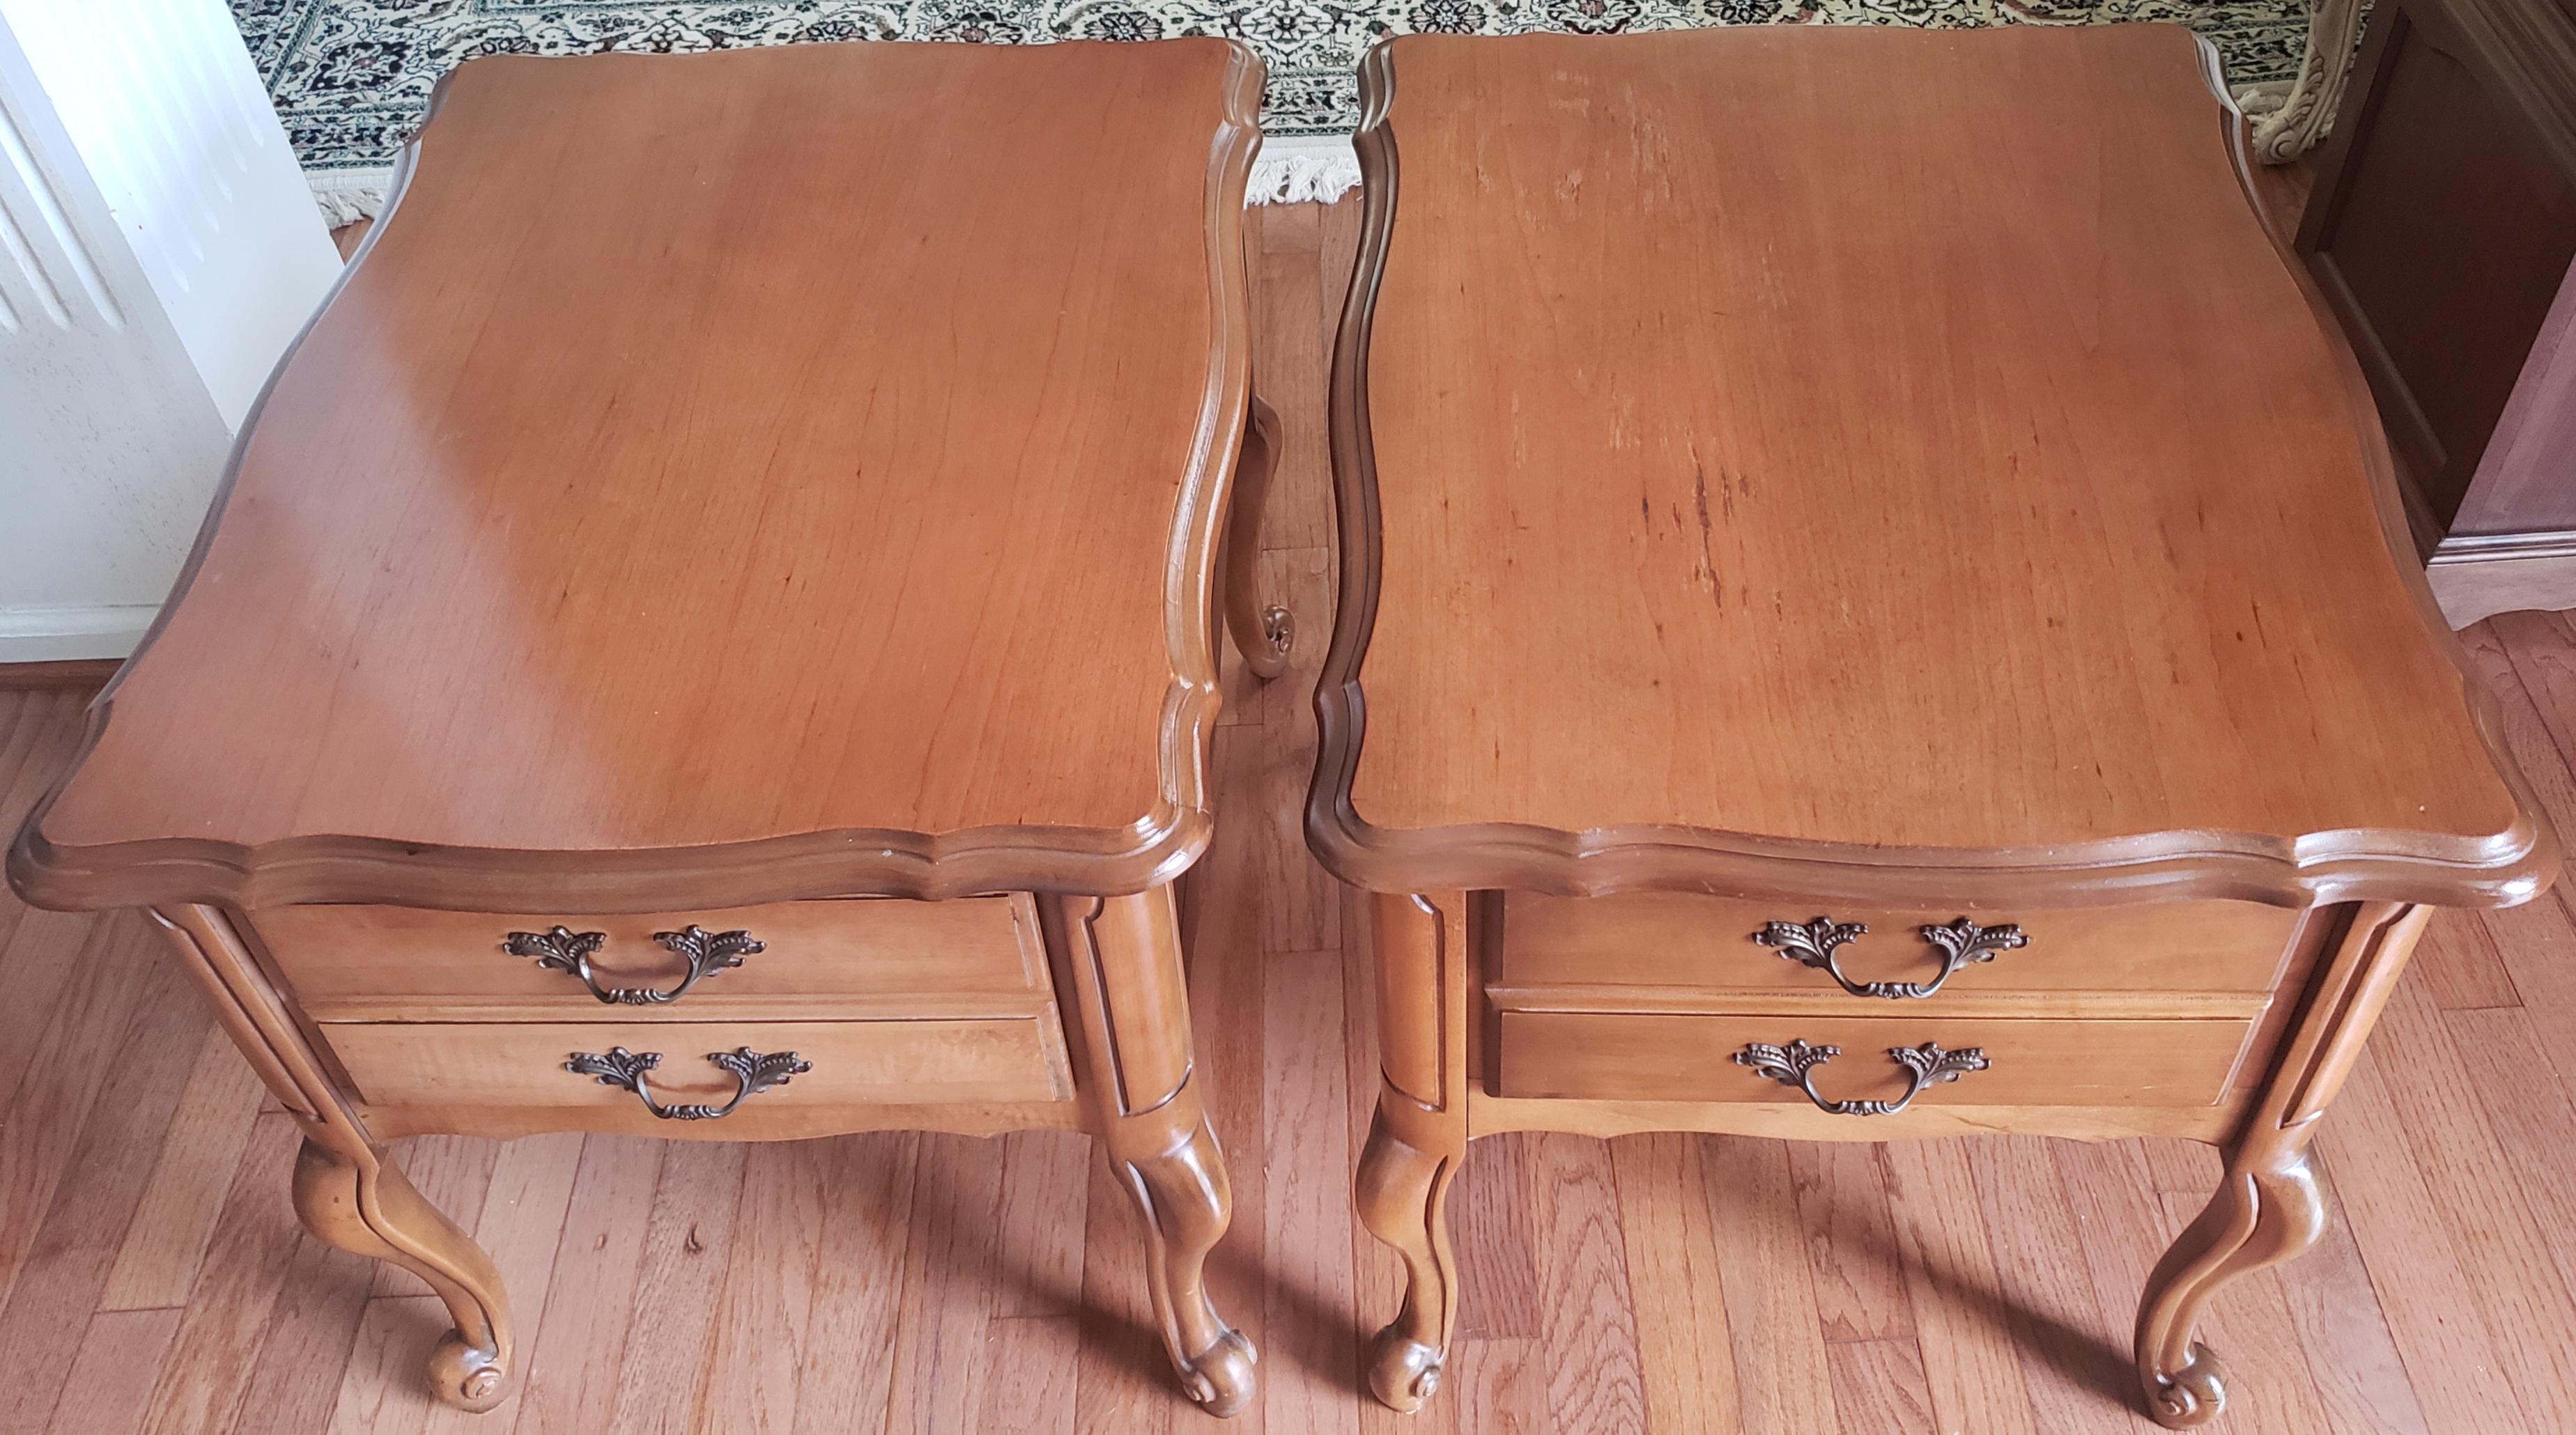 Pair of 1960s French provincial side table in solid maple. Original hardware. Plenty of storage in single Large drawer. Cabriol legs. Good vintage condition.
Measures 21